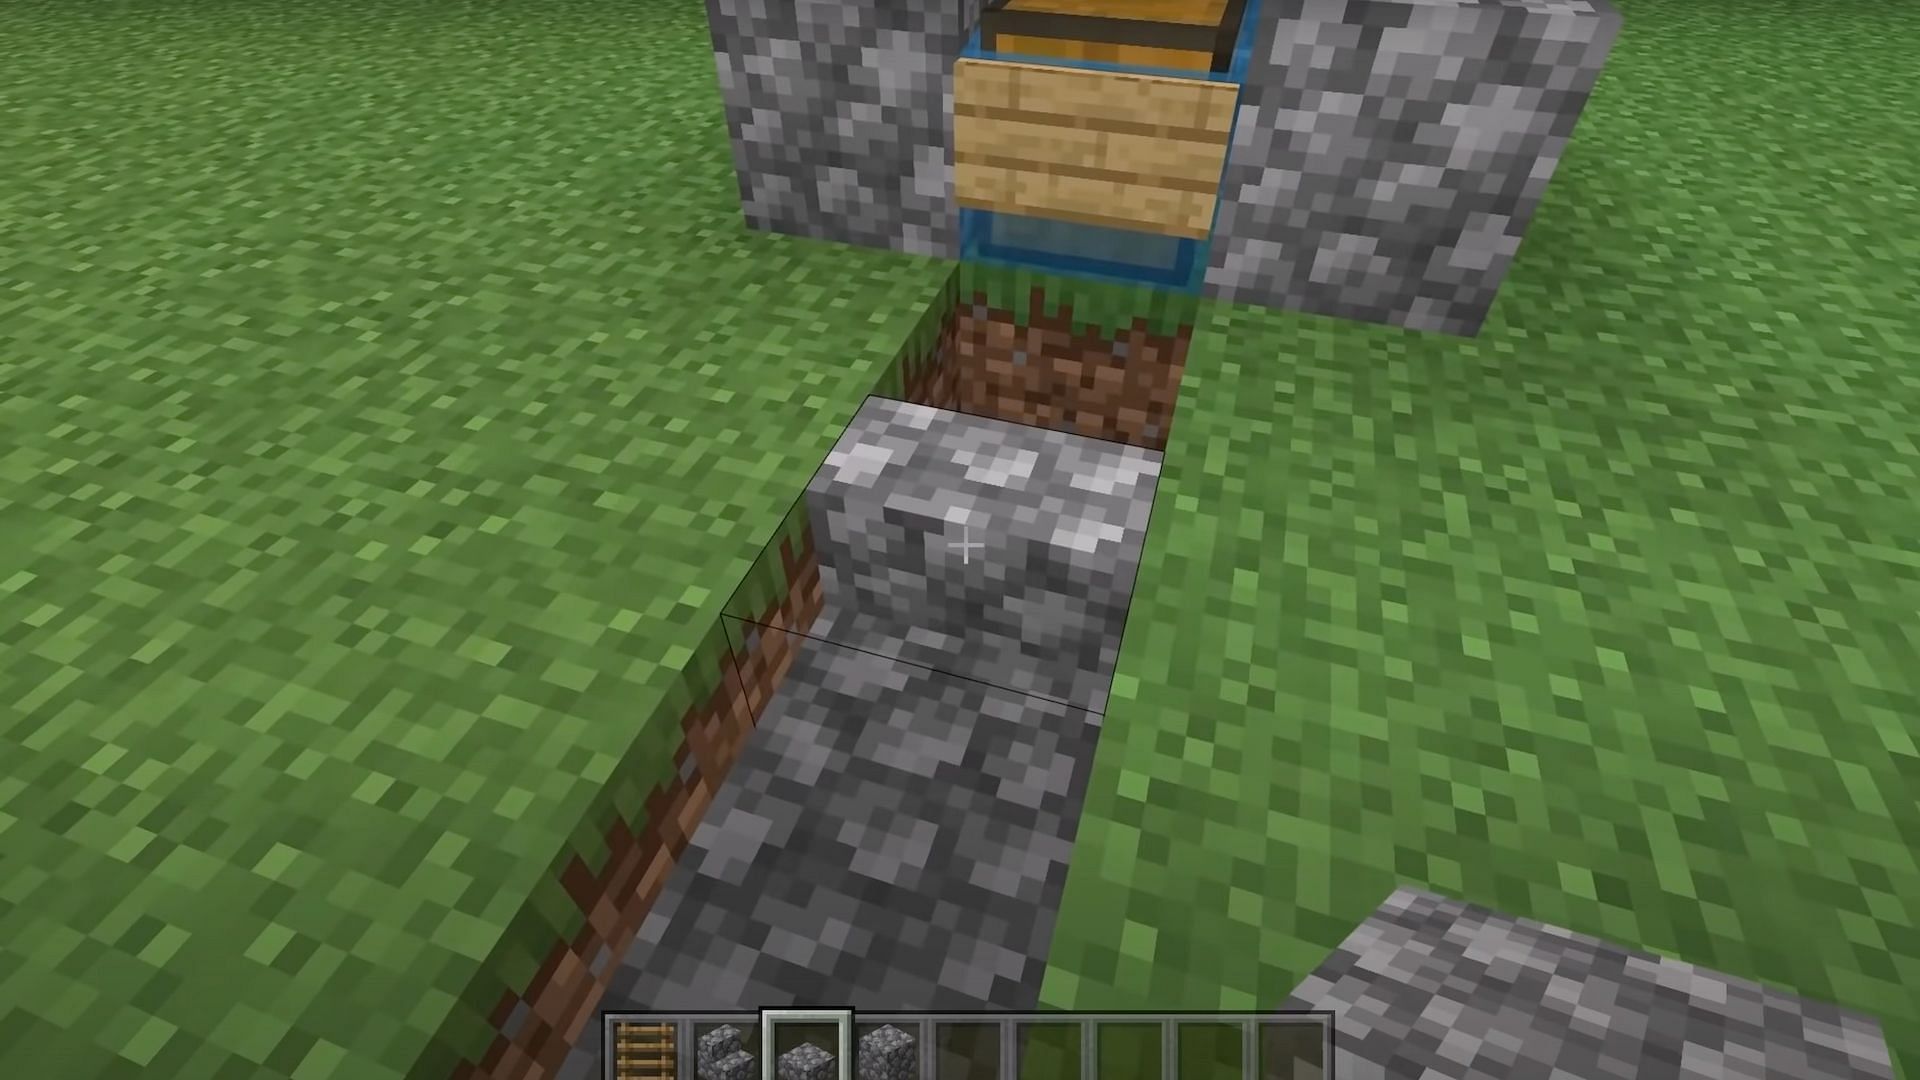 Players should place the cobblestone stairs and a slab (Image via JC Playz/YouTube)